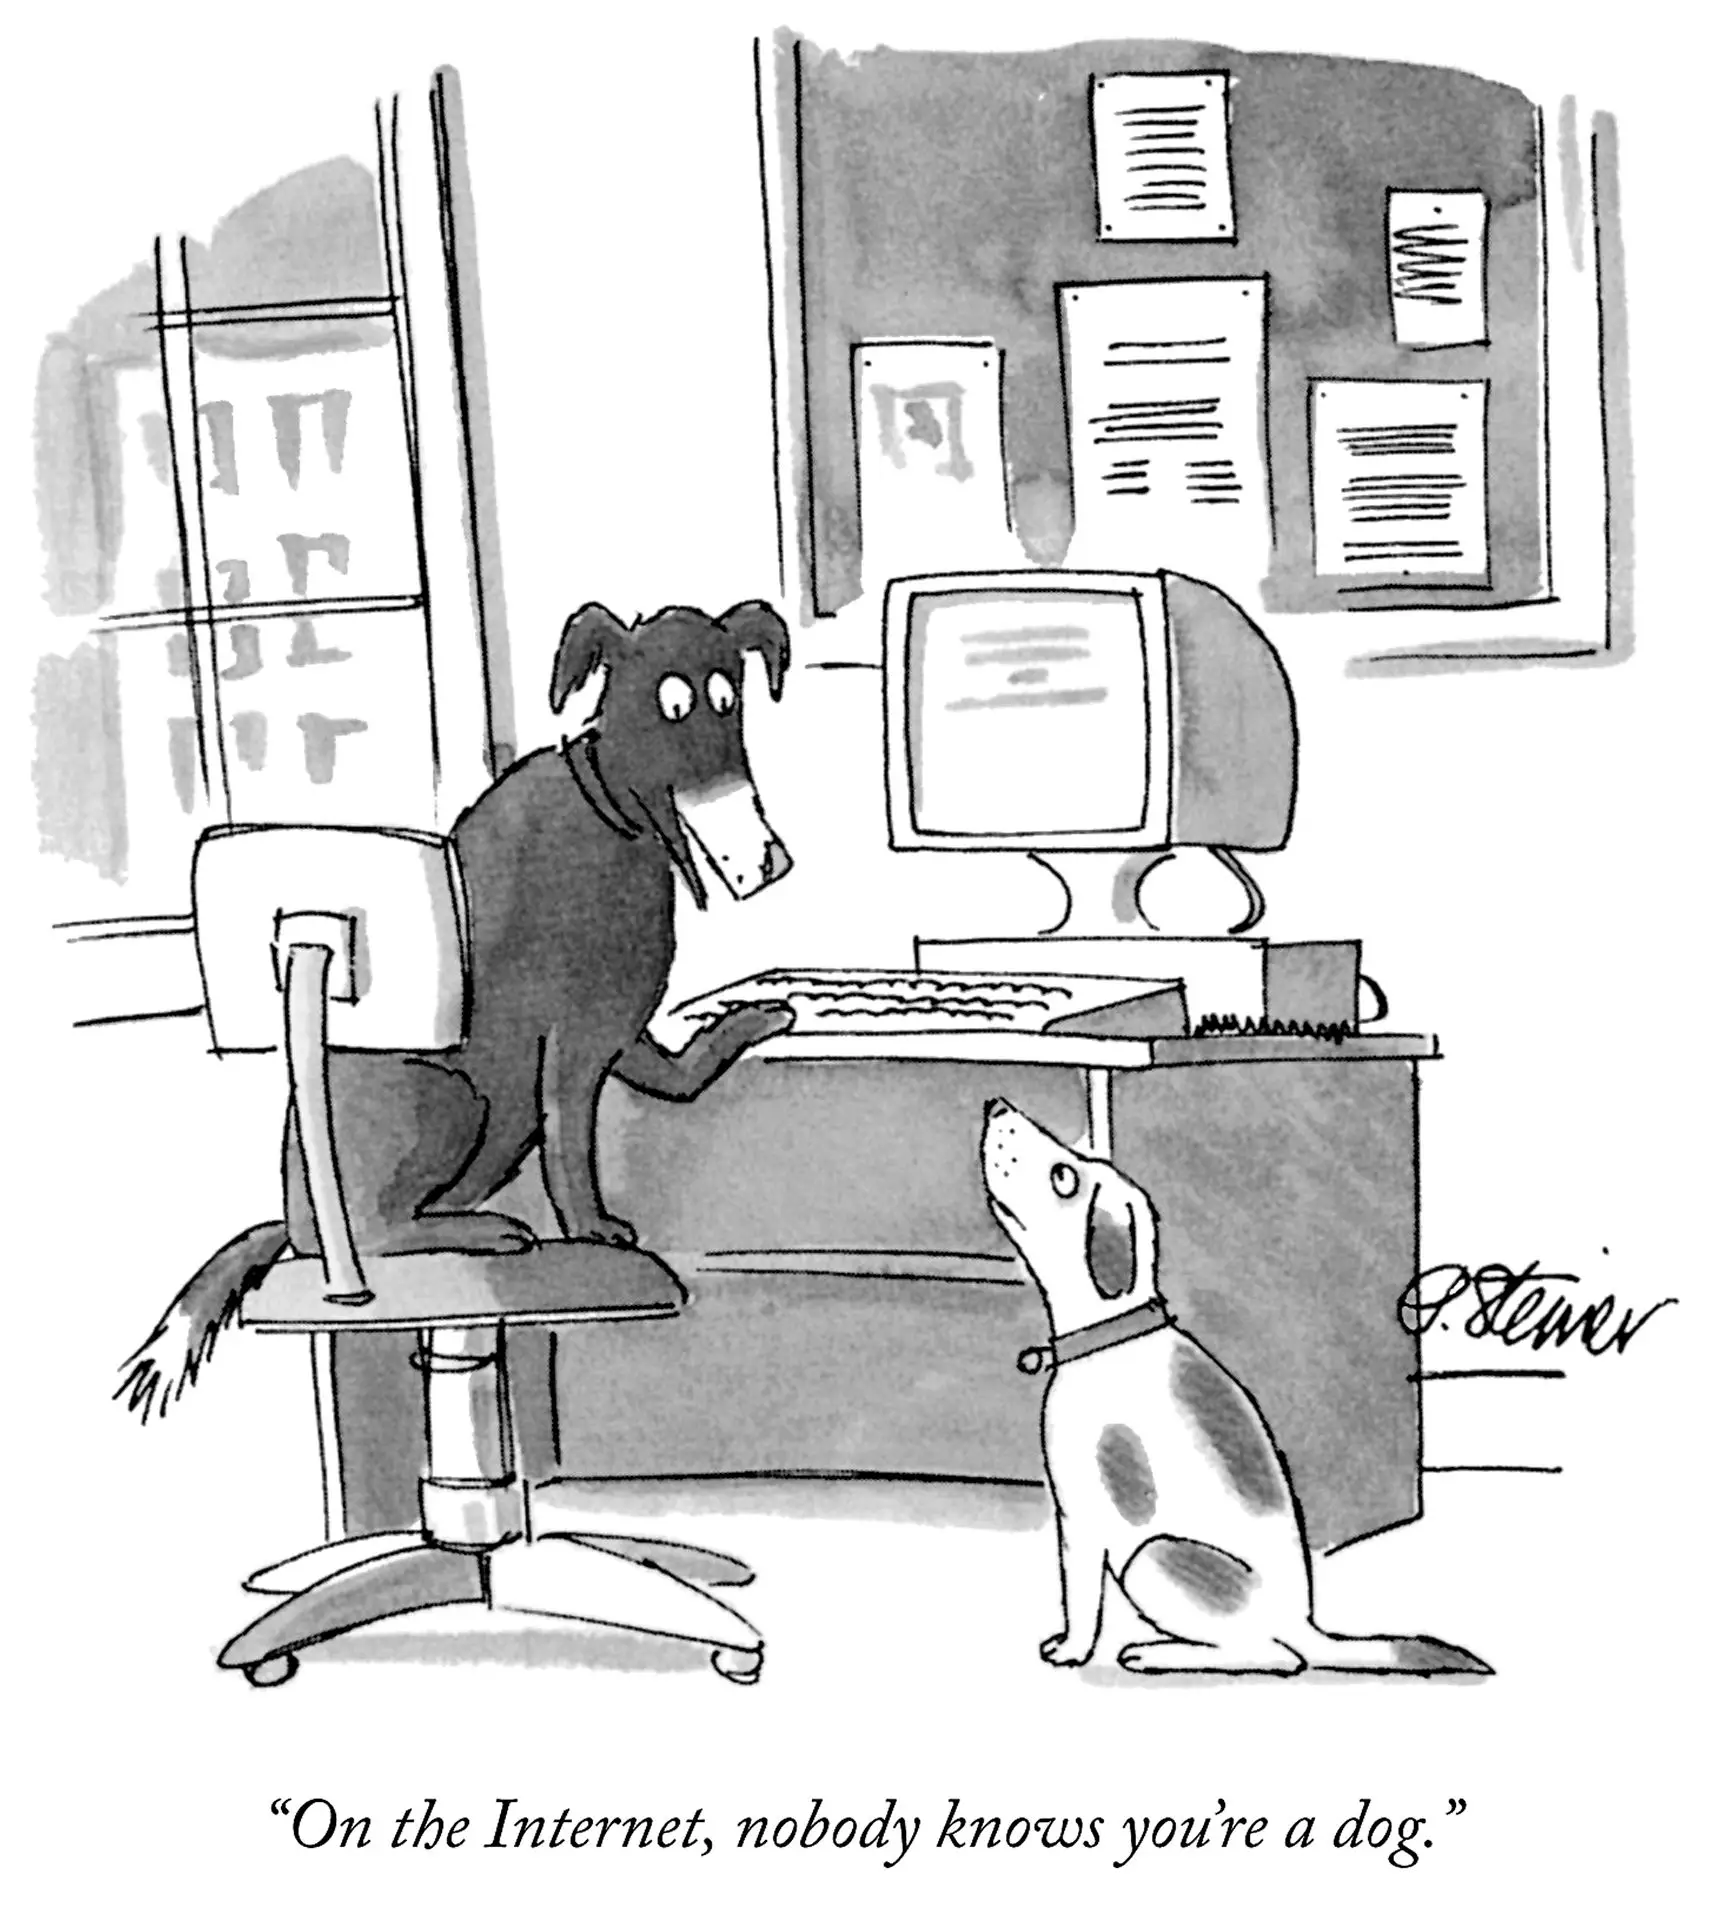 A dog, seated at a desk in front of a computer, stares down at another dog. It explains “On the Internet, nobody knows you’re a dog.”